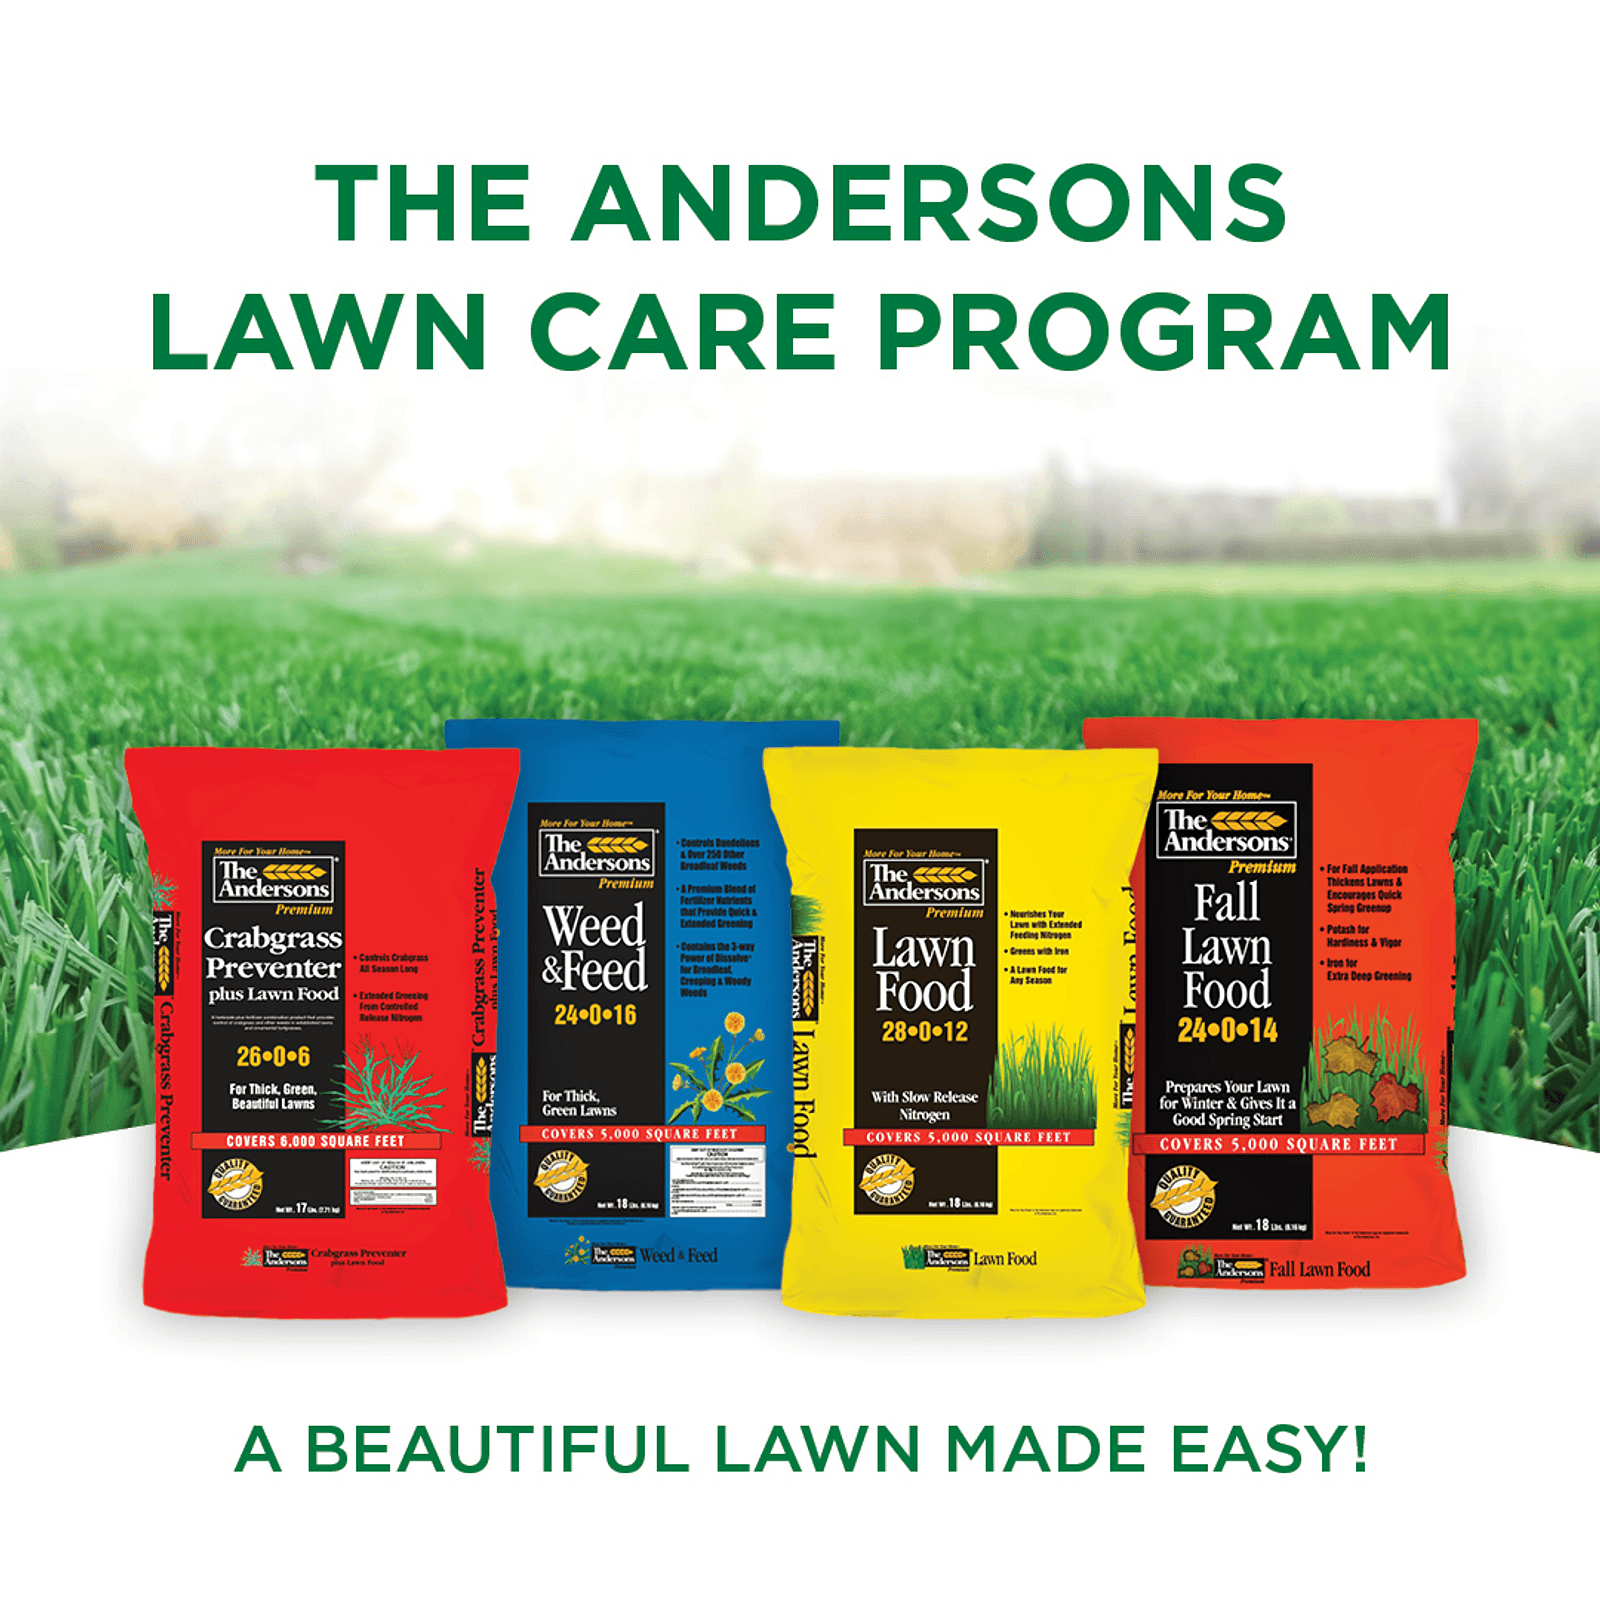 The Andersons Lawn Care Program Graphic